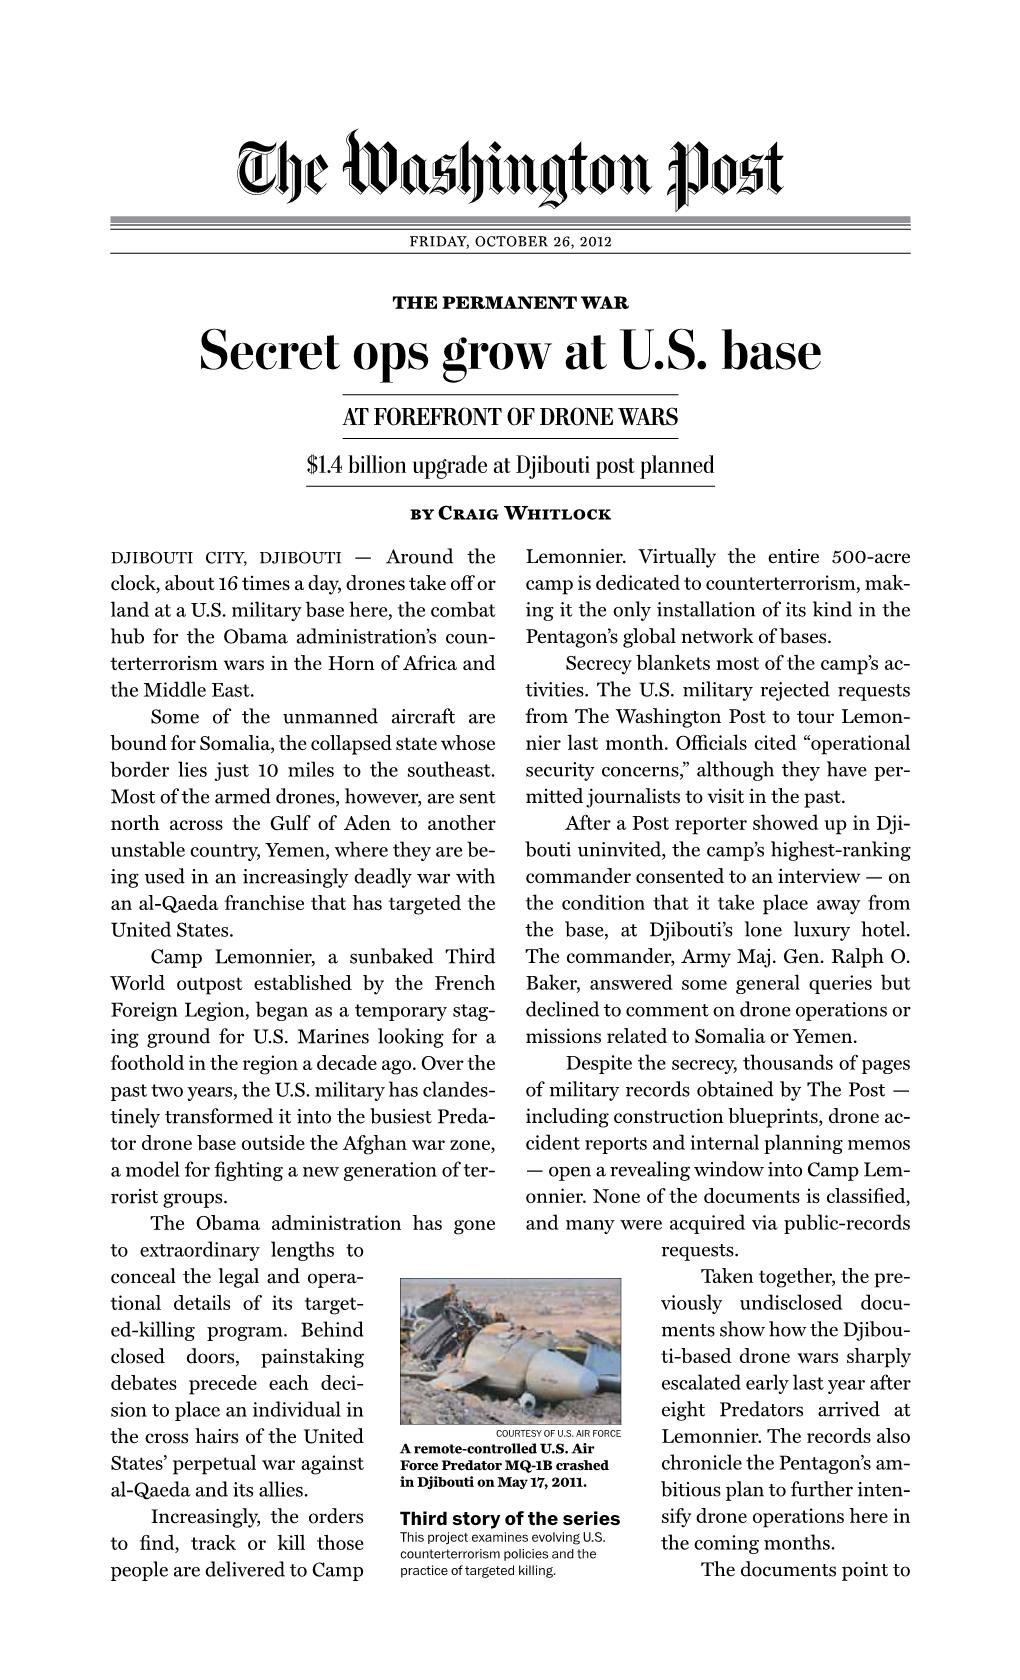 Secret Ops Grow at U.S. Base at Forefront of Drone Wars $1.4 Billion Upgrade at Djibouti Post Planned